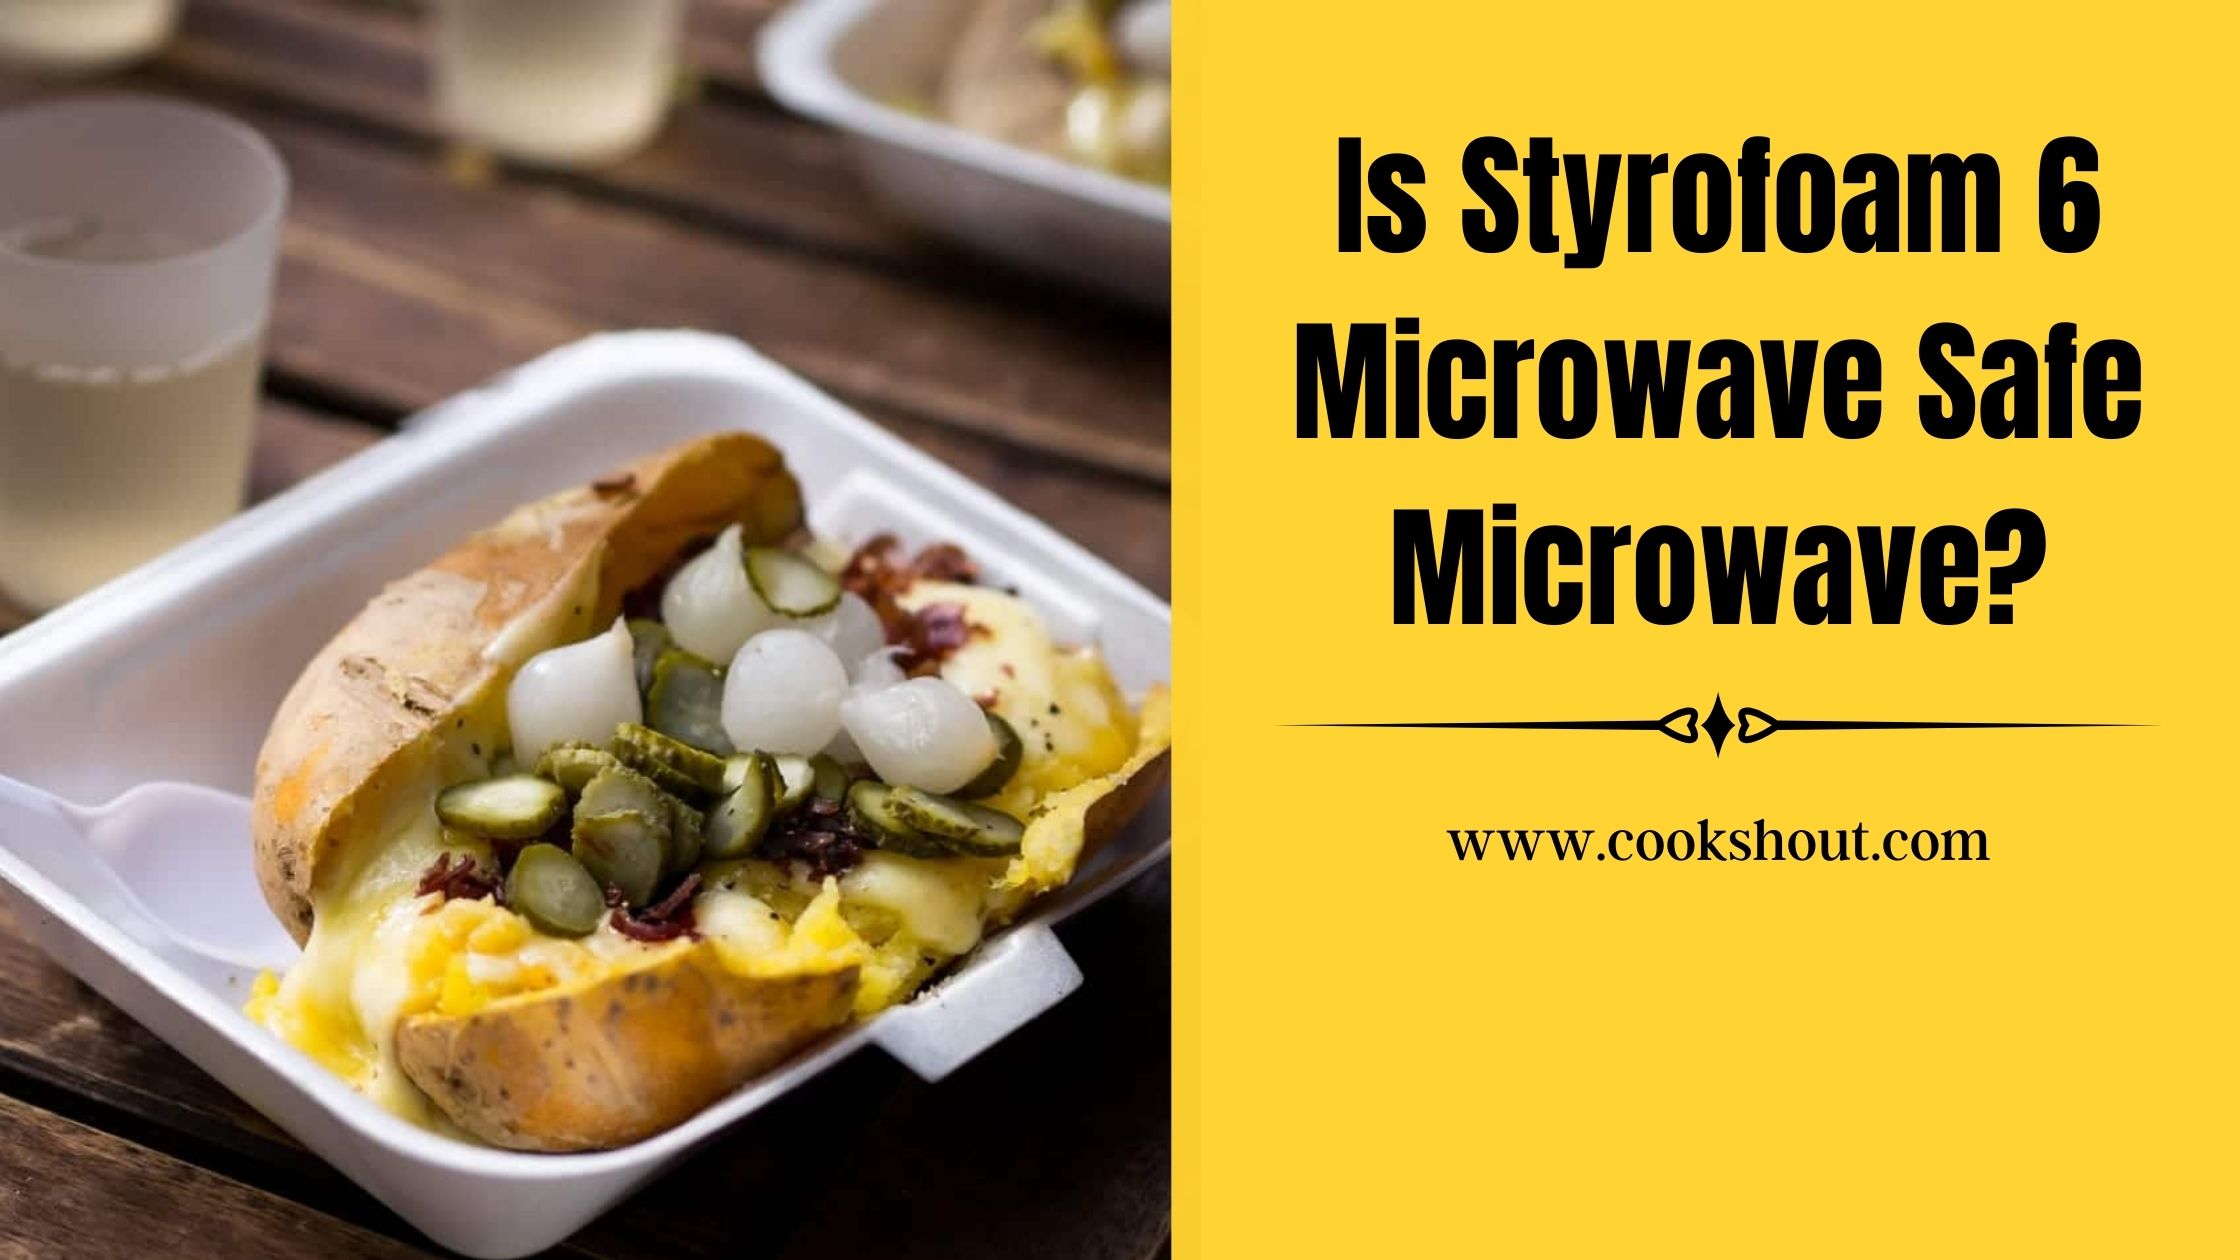 Can you microwave number 6 Styrofoam?
